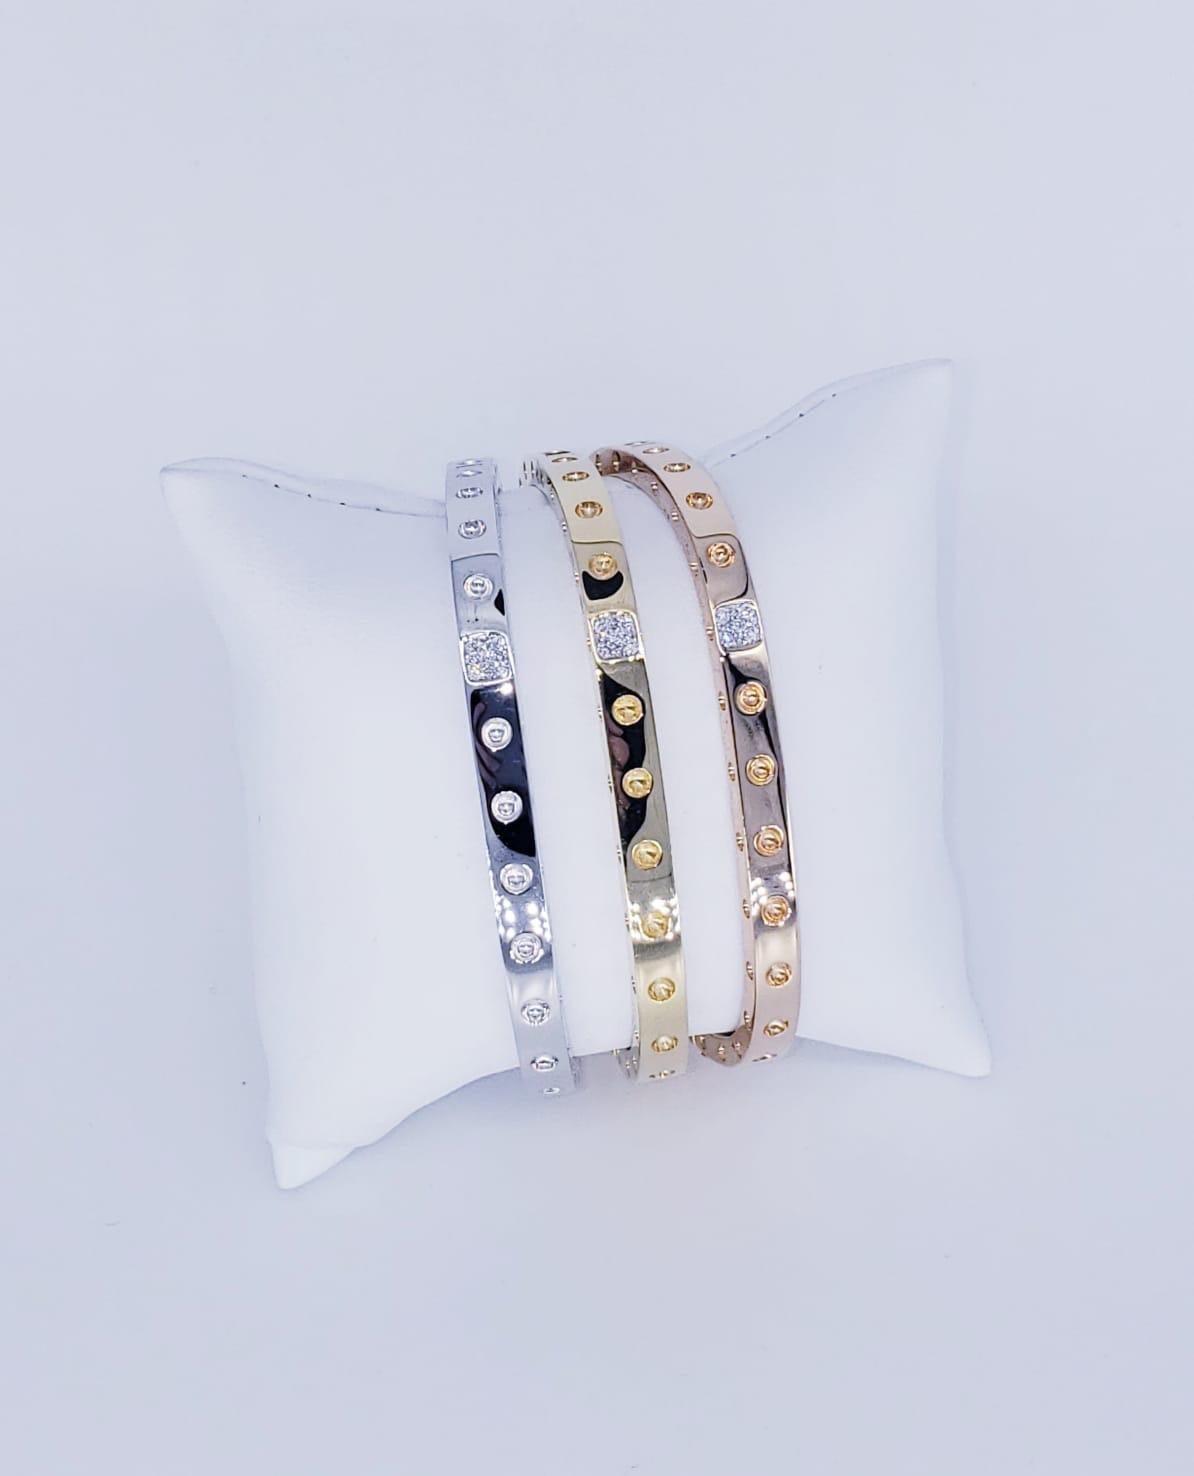 Roberto Coin 18k Tri-Gold Square Bangle Set With Diamonds. Gorgeous bangles featuring hinges push-lock clasp. The diamonds for the set is approx 0.21 and ruby in each bangle in the inside. The bangles are from the Pois Moi collection by Roberto